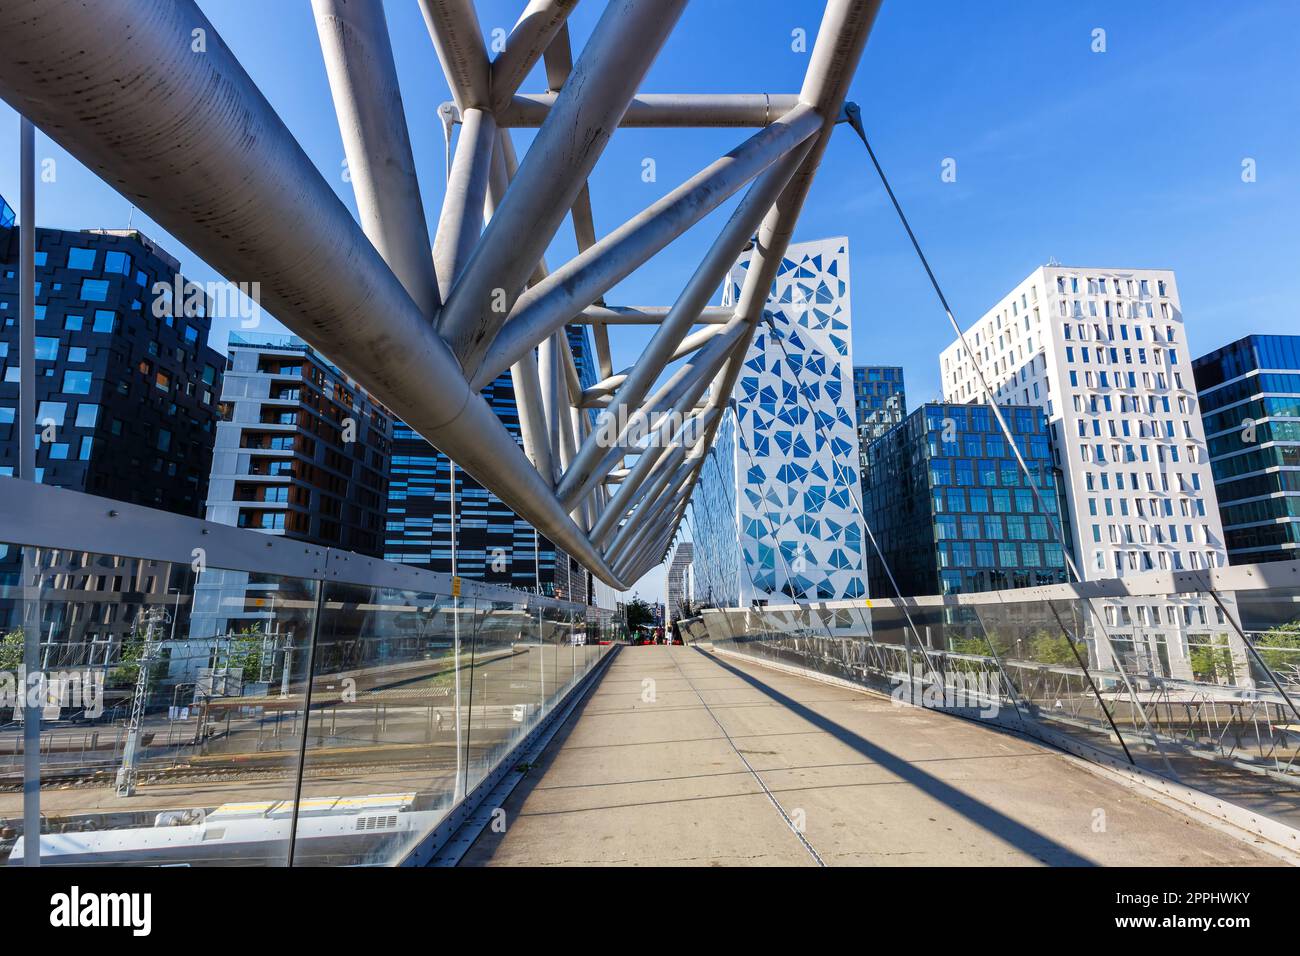 Oslo skyline modern city architecture buildings with a bridge at Barcode District in Norway Stock Photo